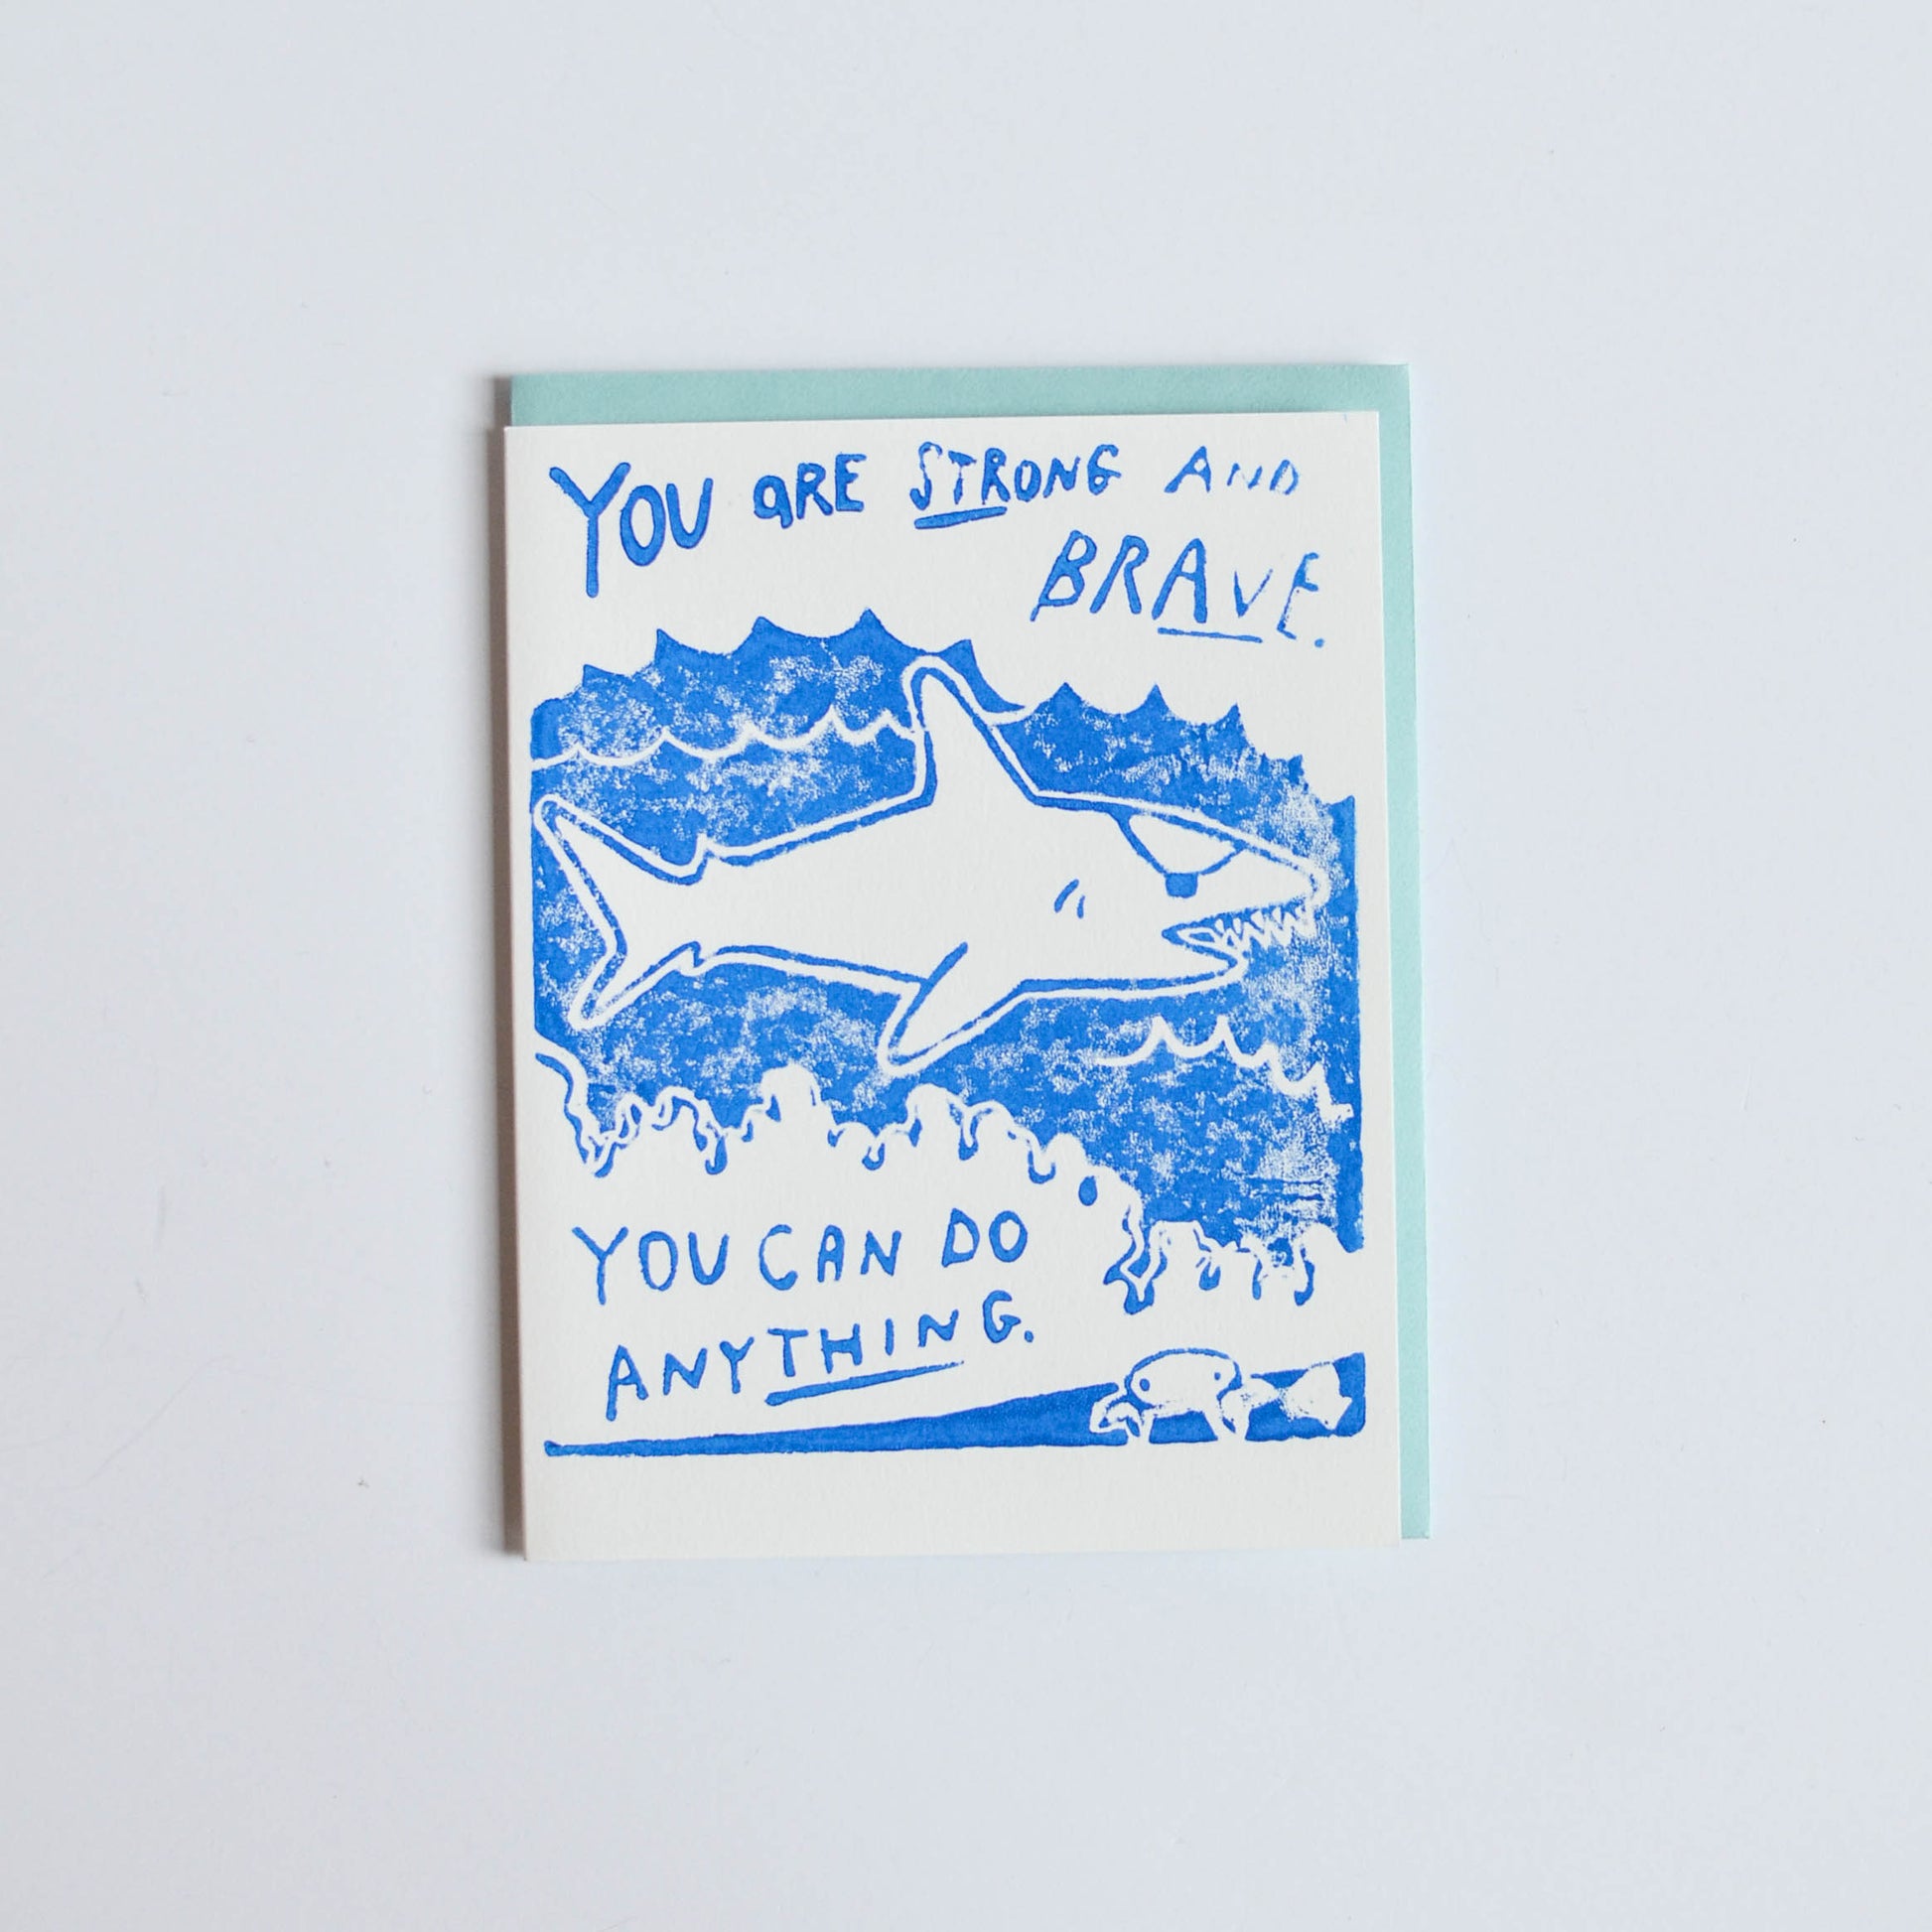 'You are strong and brave. You can do anything' Card